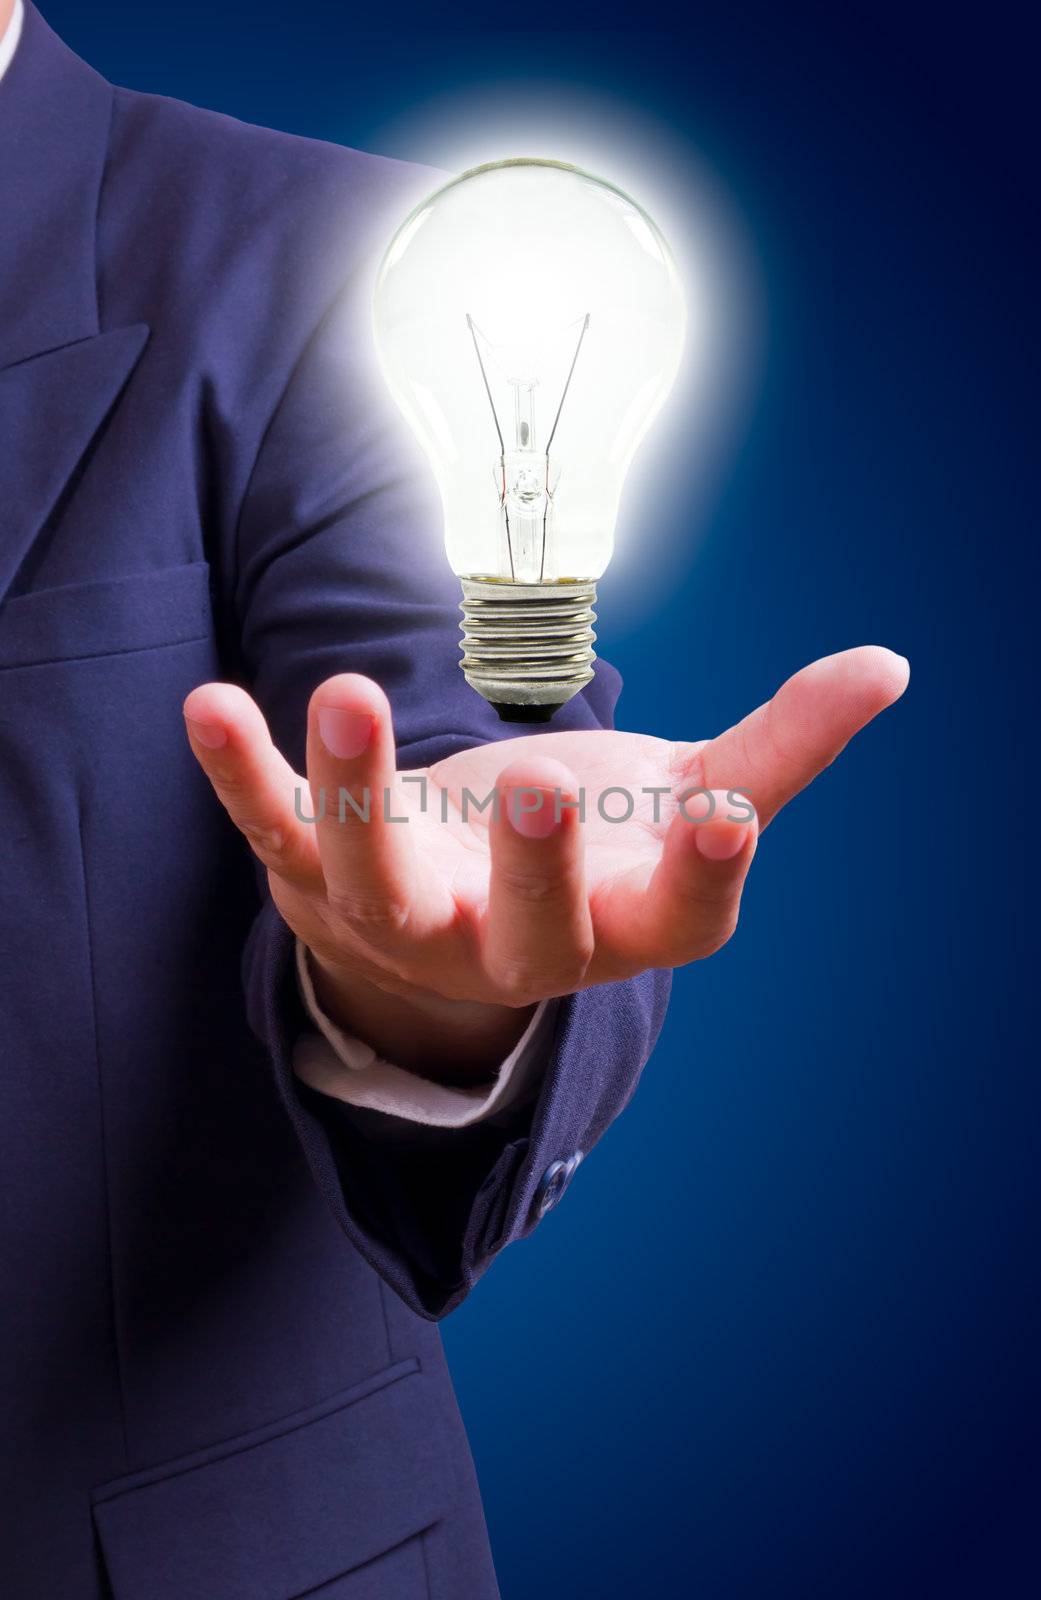 light bulb on hand by tungphoto